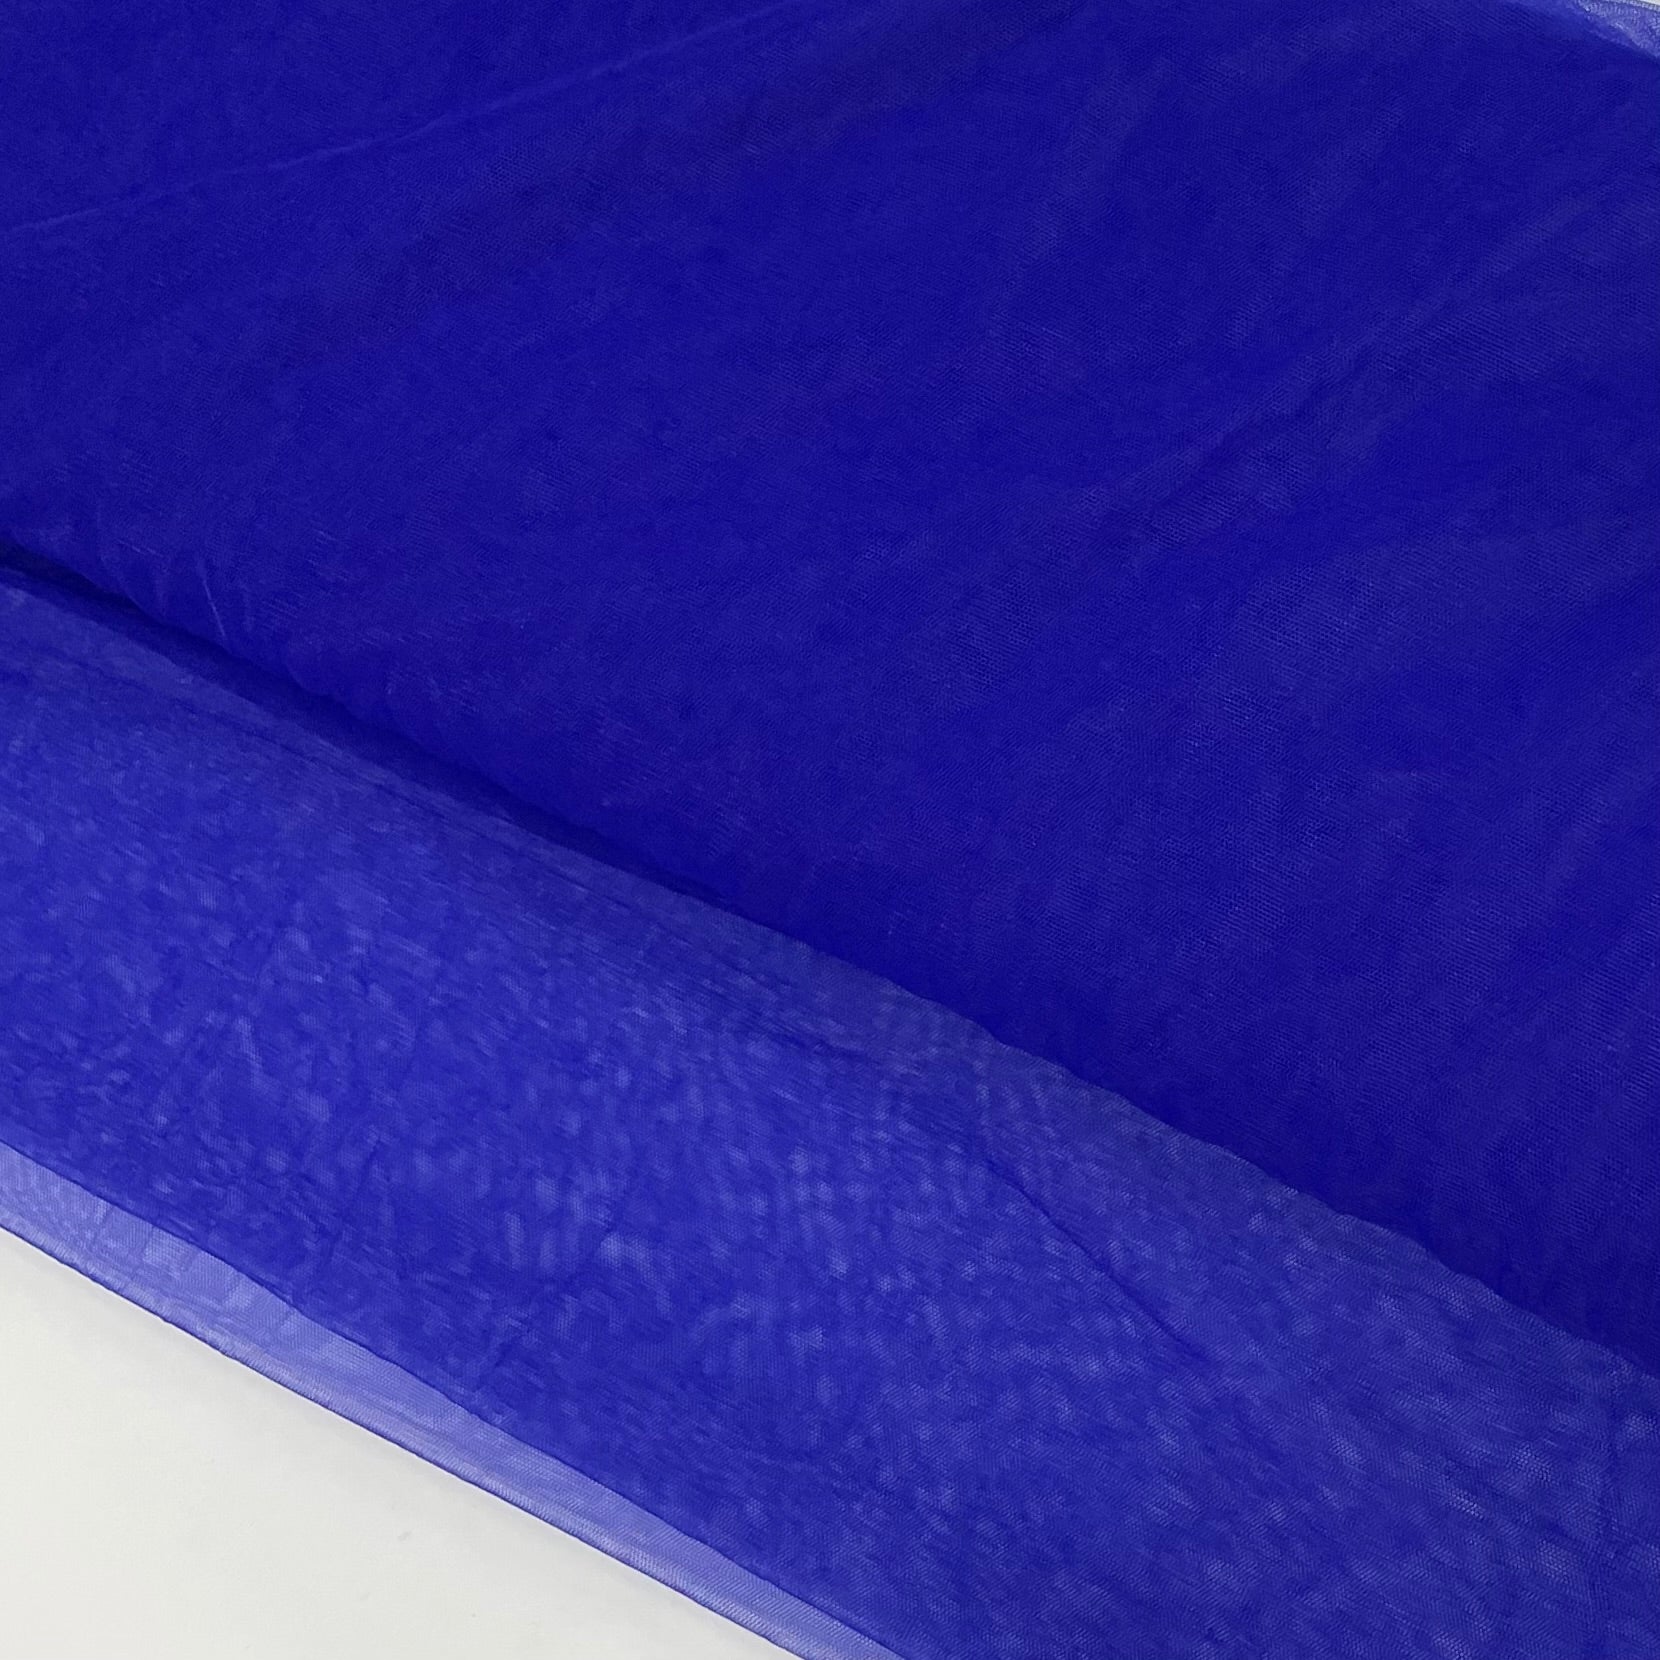 Blue Solid Net Fabric ,Plain Weave 44 in - TradeUNO